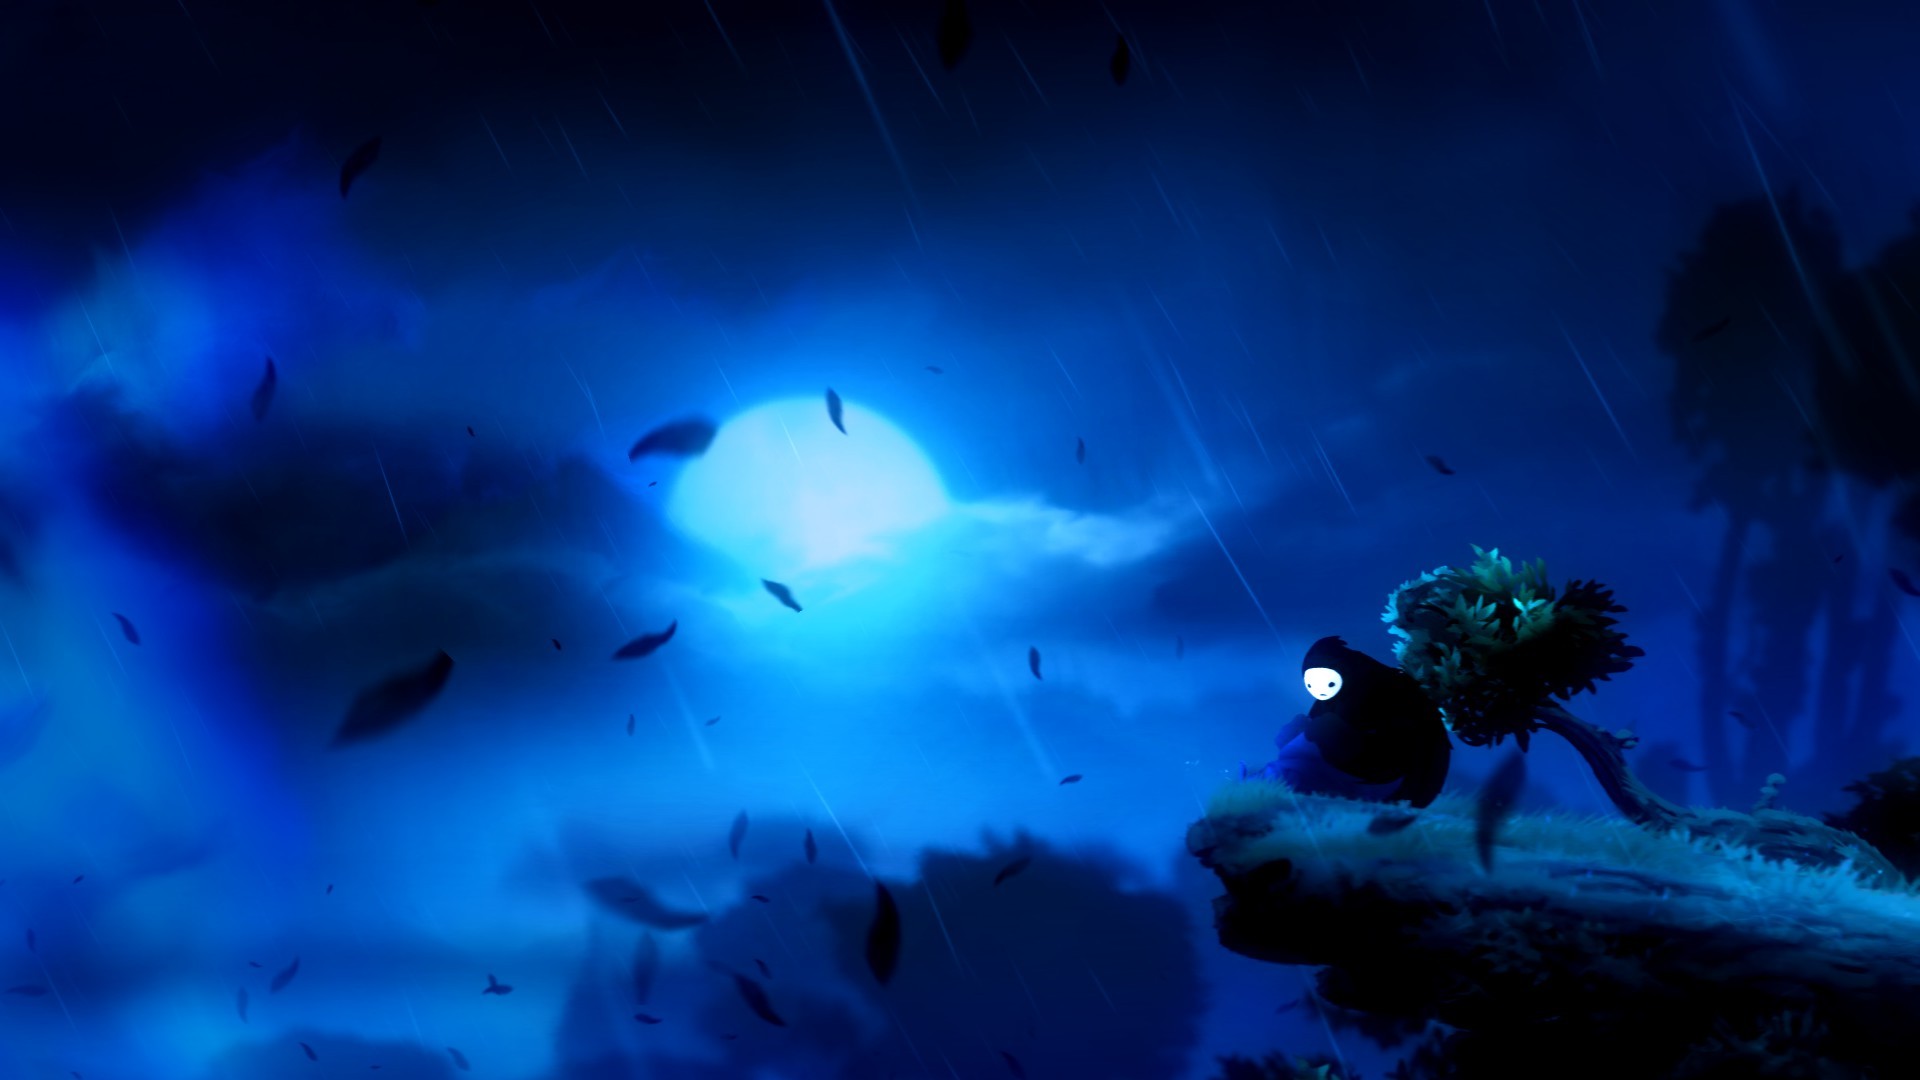 General 1920x1080 Ori and the Blind Forest screen shot video games blue rain